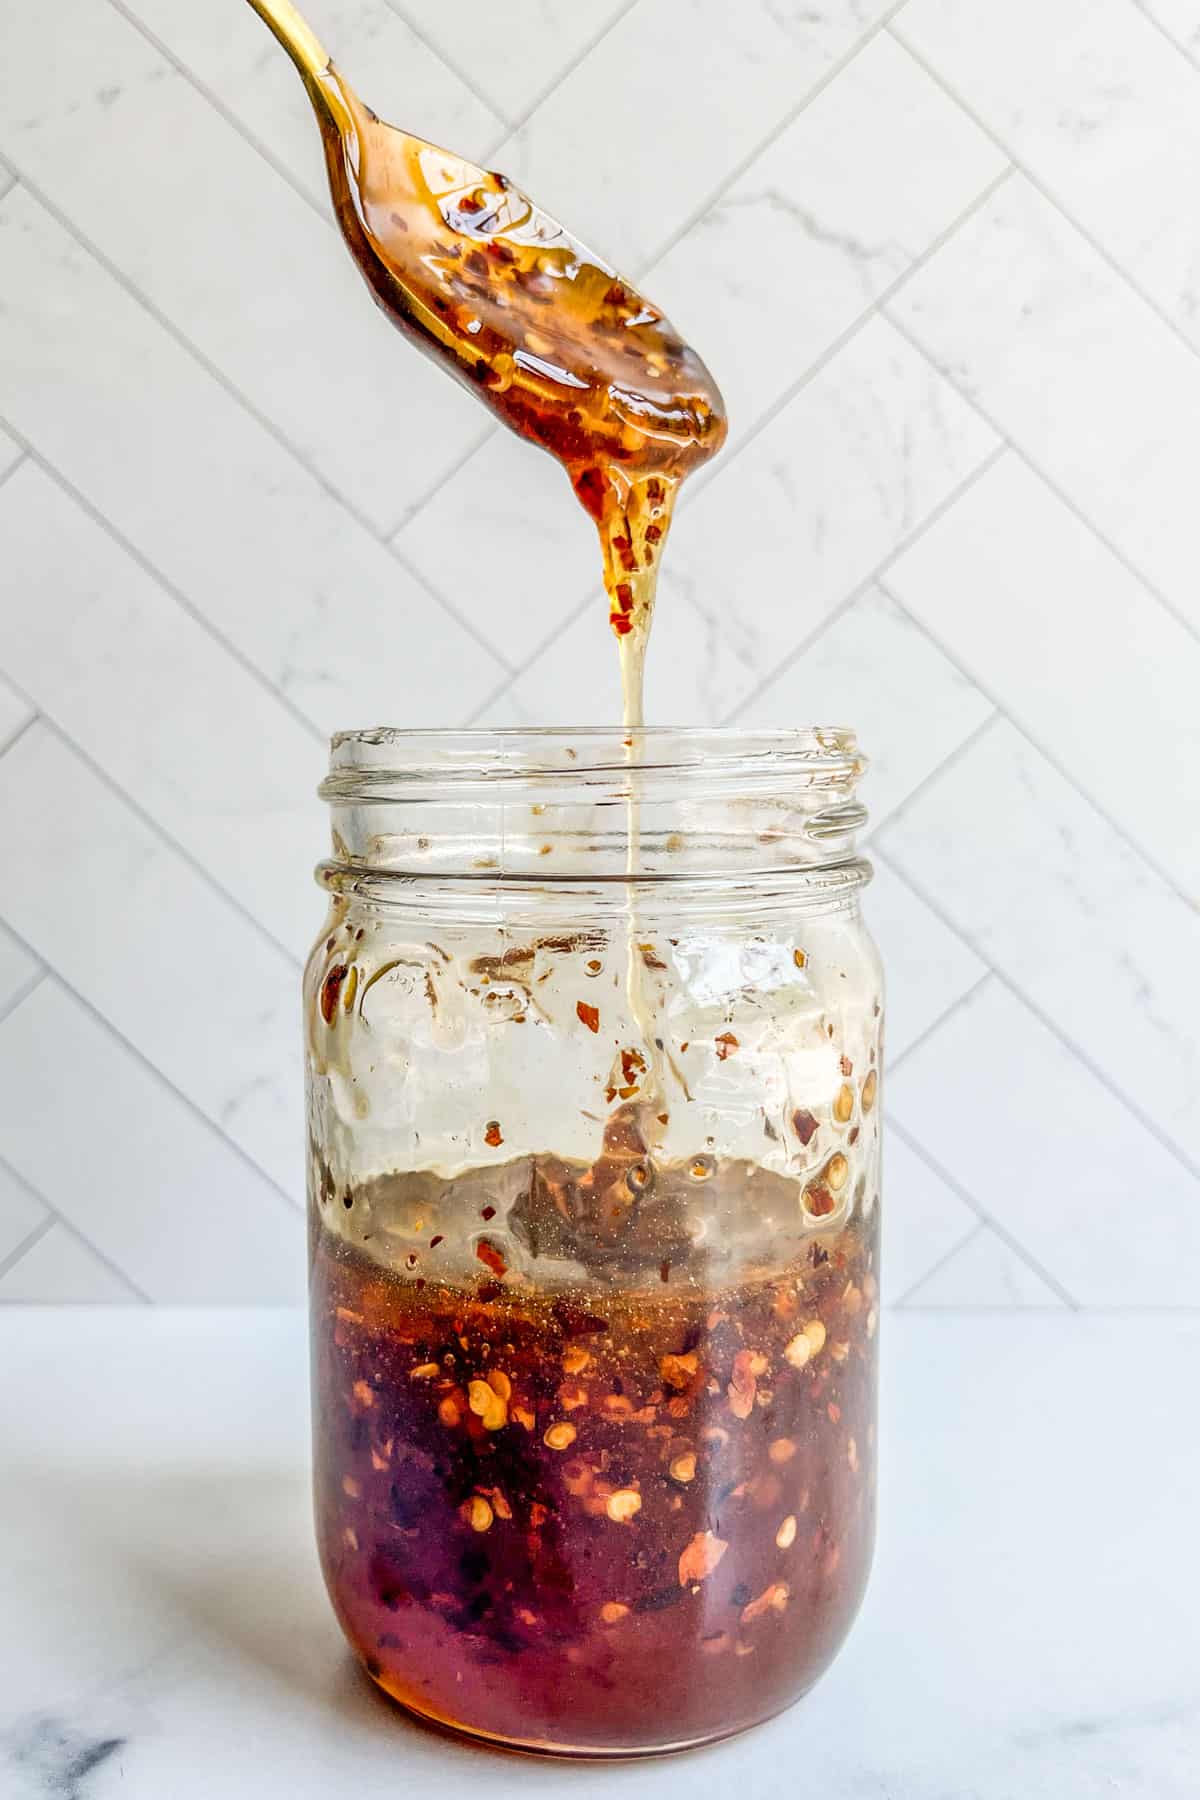 Hot honey in a jar with a spoon above it.